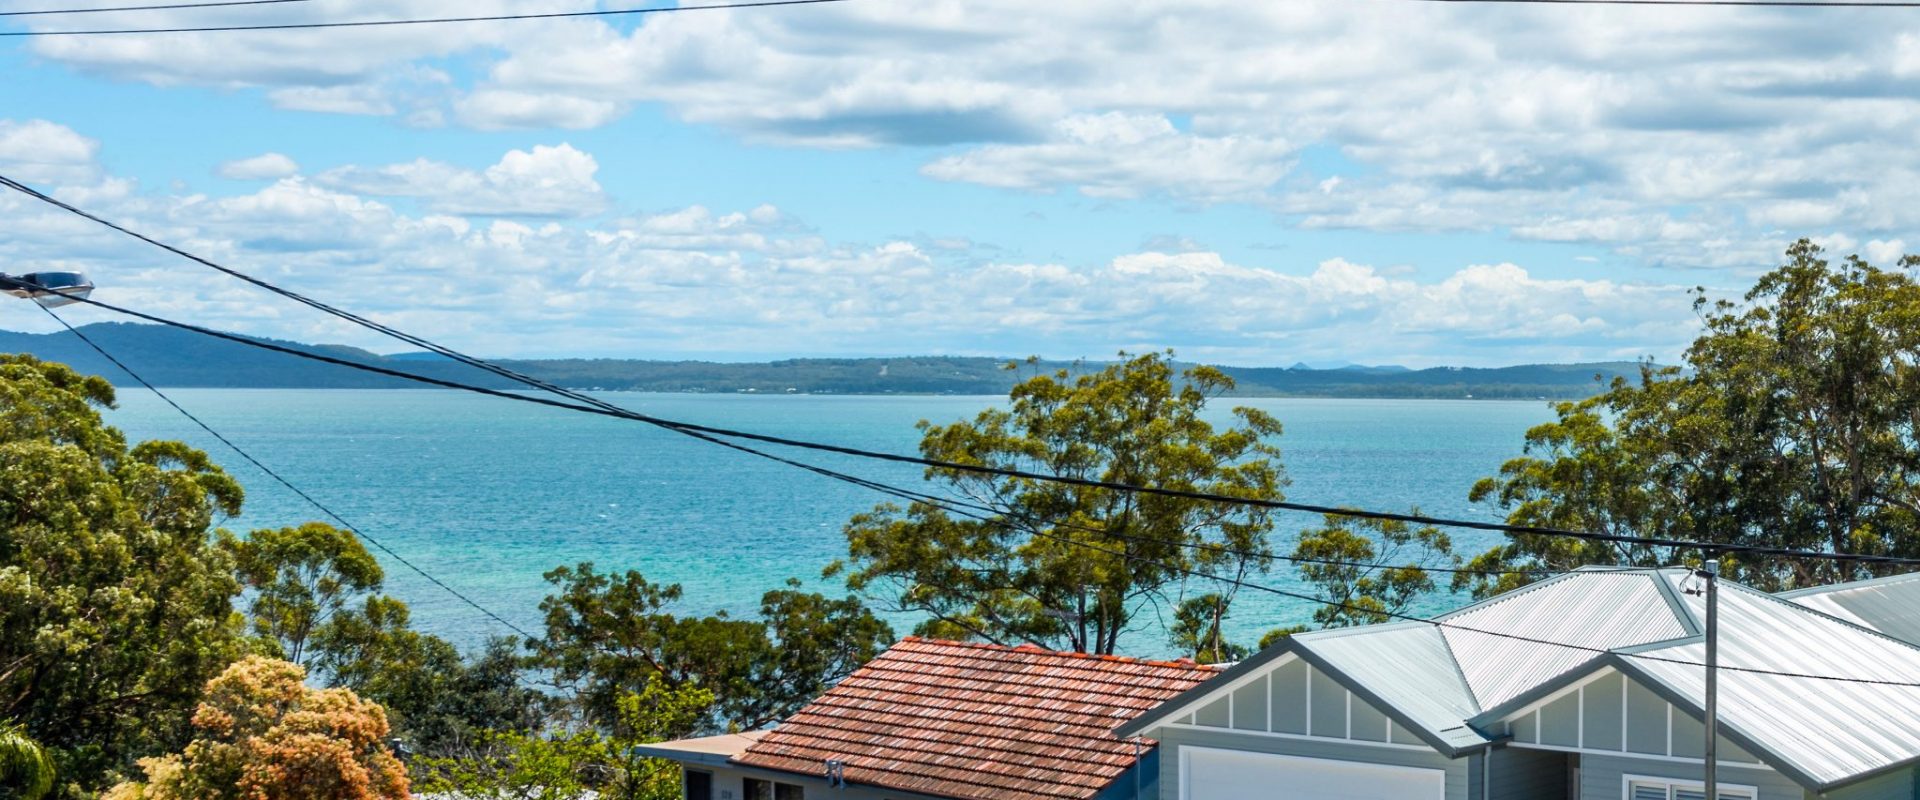 Water views and cooling breezes …. this is the bay lifestyle